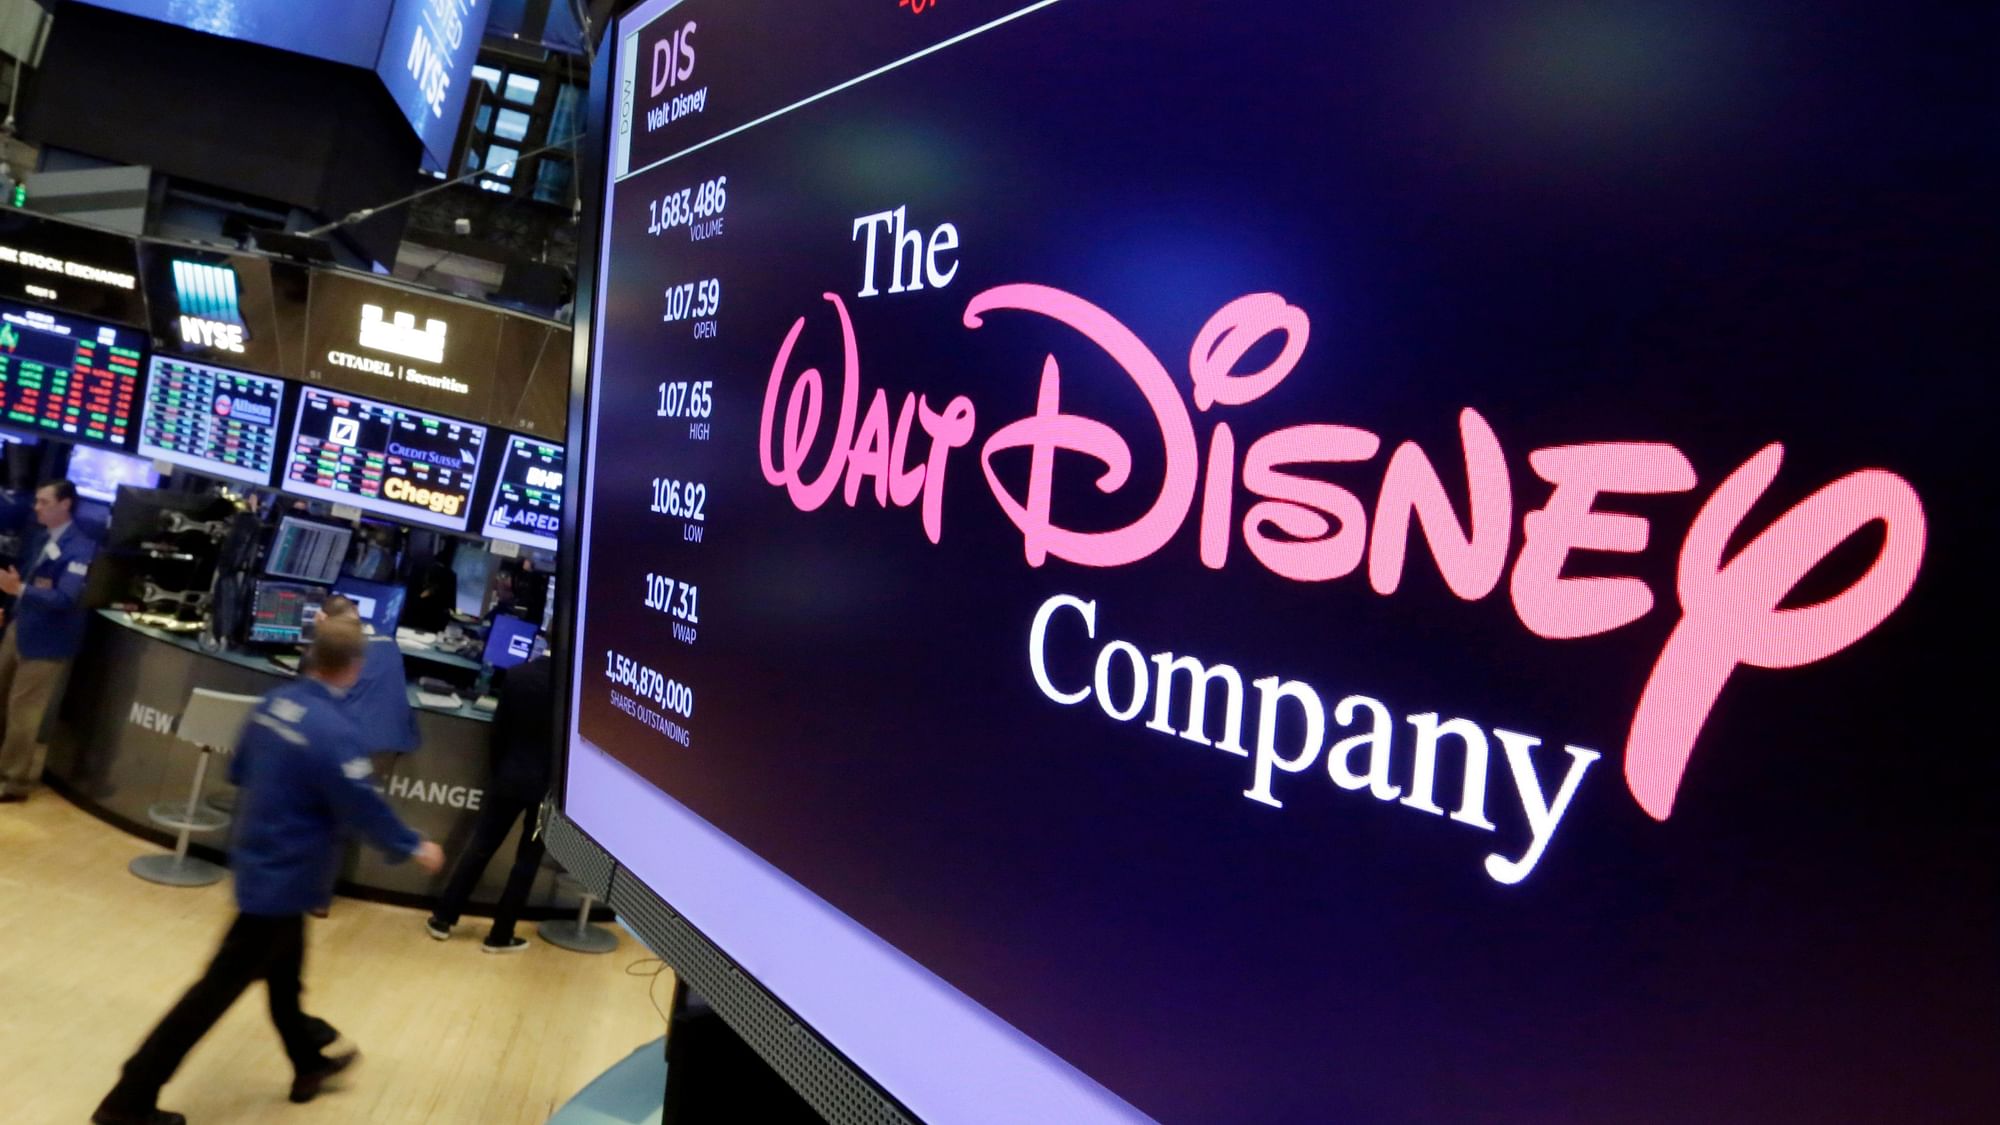 Disney Plus will roll out in the US on 12 November at a price of $6.99 per month, or $69.99 per year.